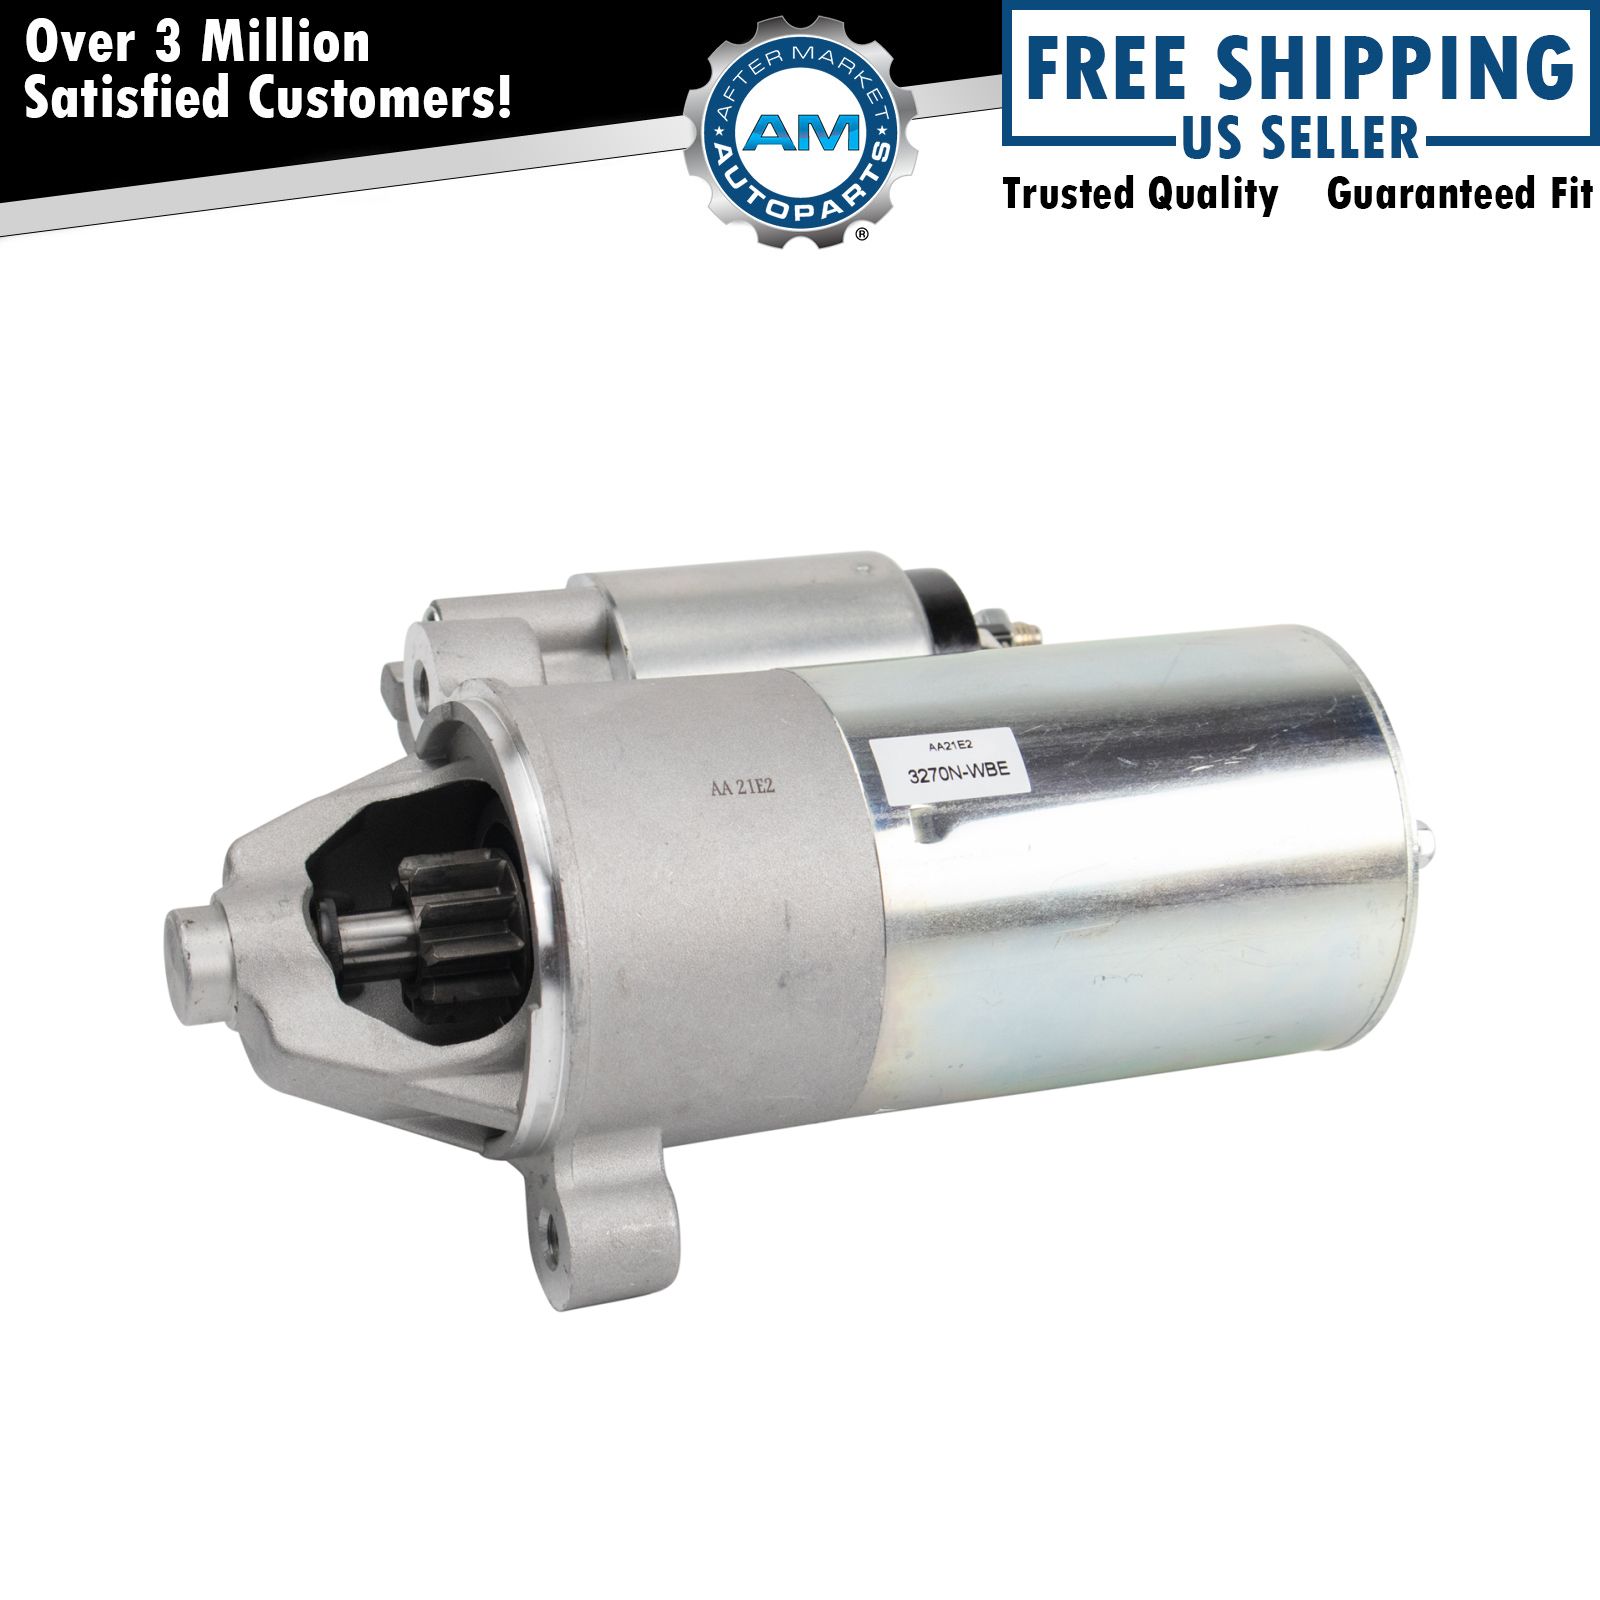 New Replacement Starter Motor for Lincoln Mercury Topaz Ford Taurus Windstar